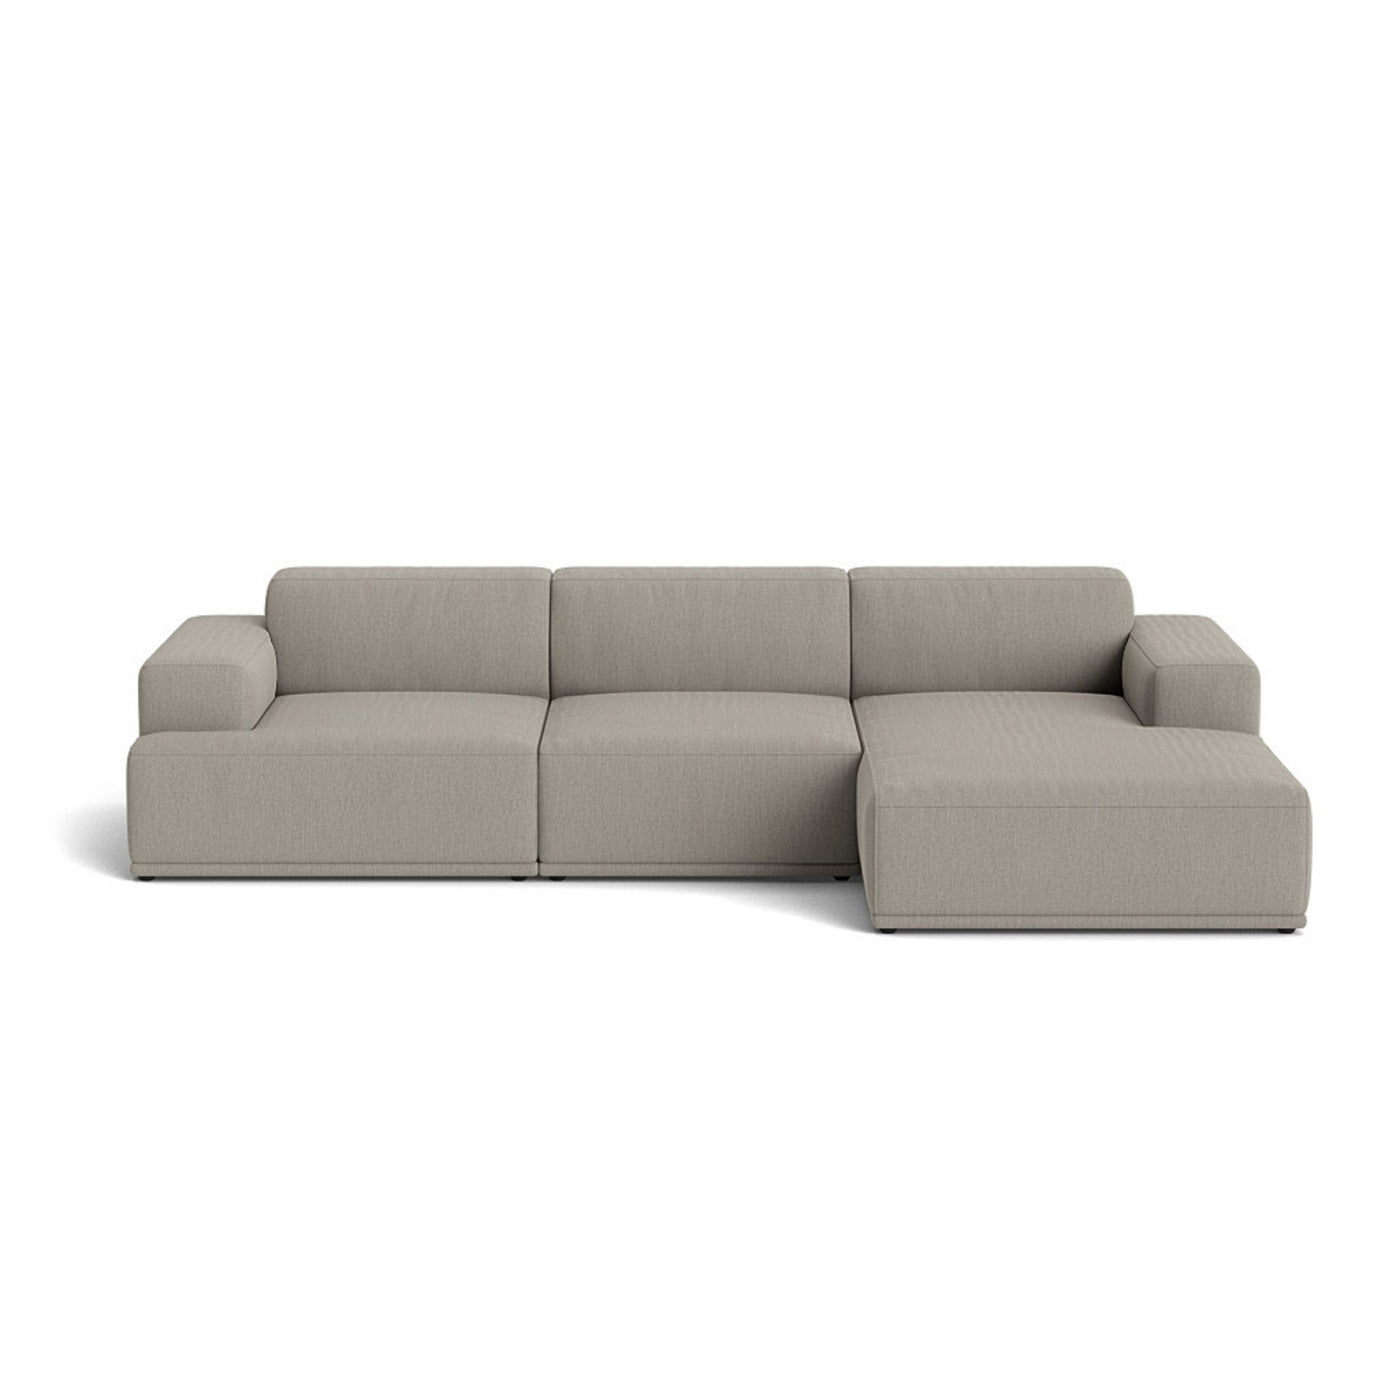 Muuto Connect Soft Modular 3 Seater Sofa, configuration 3. Made-to-order from someday designs. #colour_re-wool-218